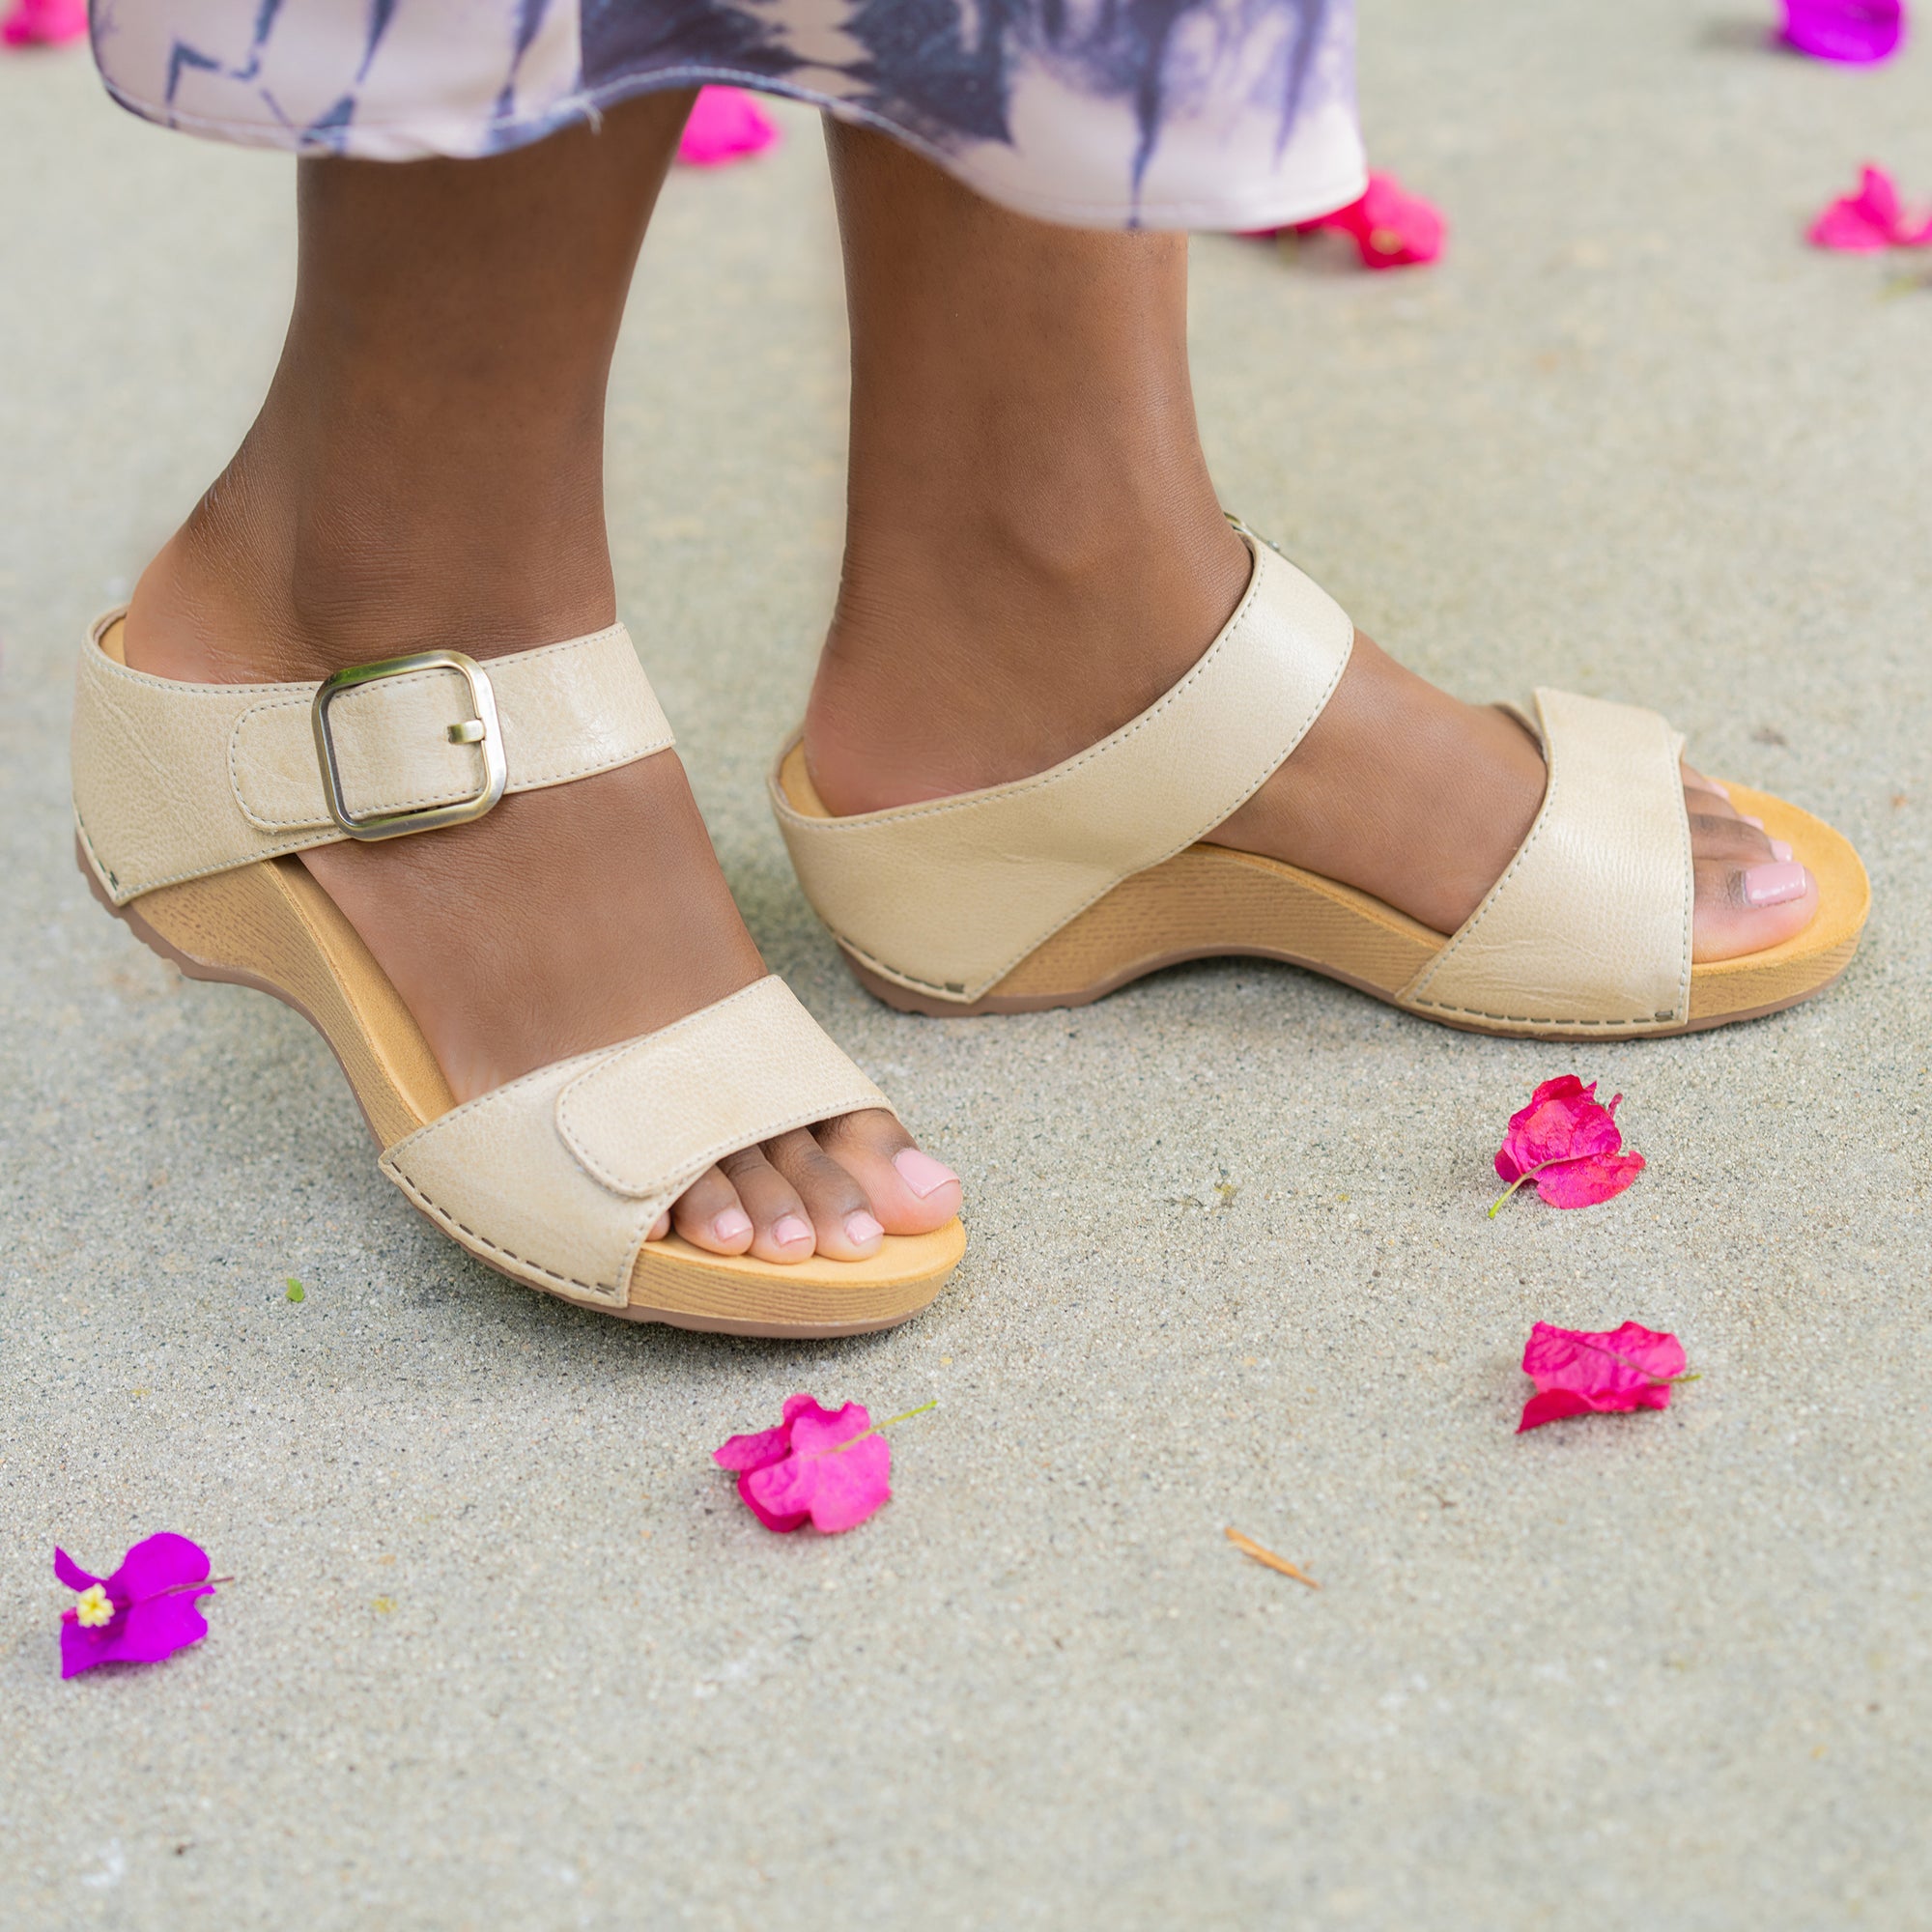 A closeup of tan flatform sandals with a two-strap design.